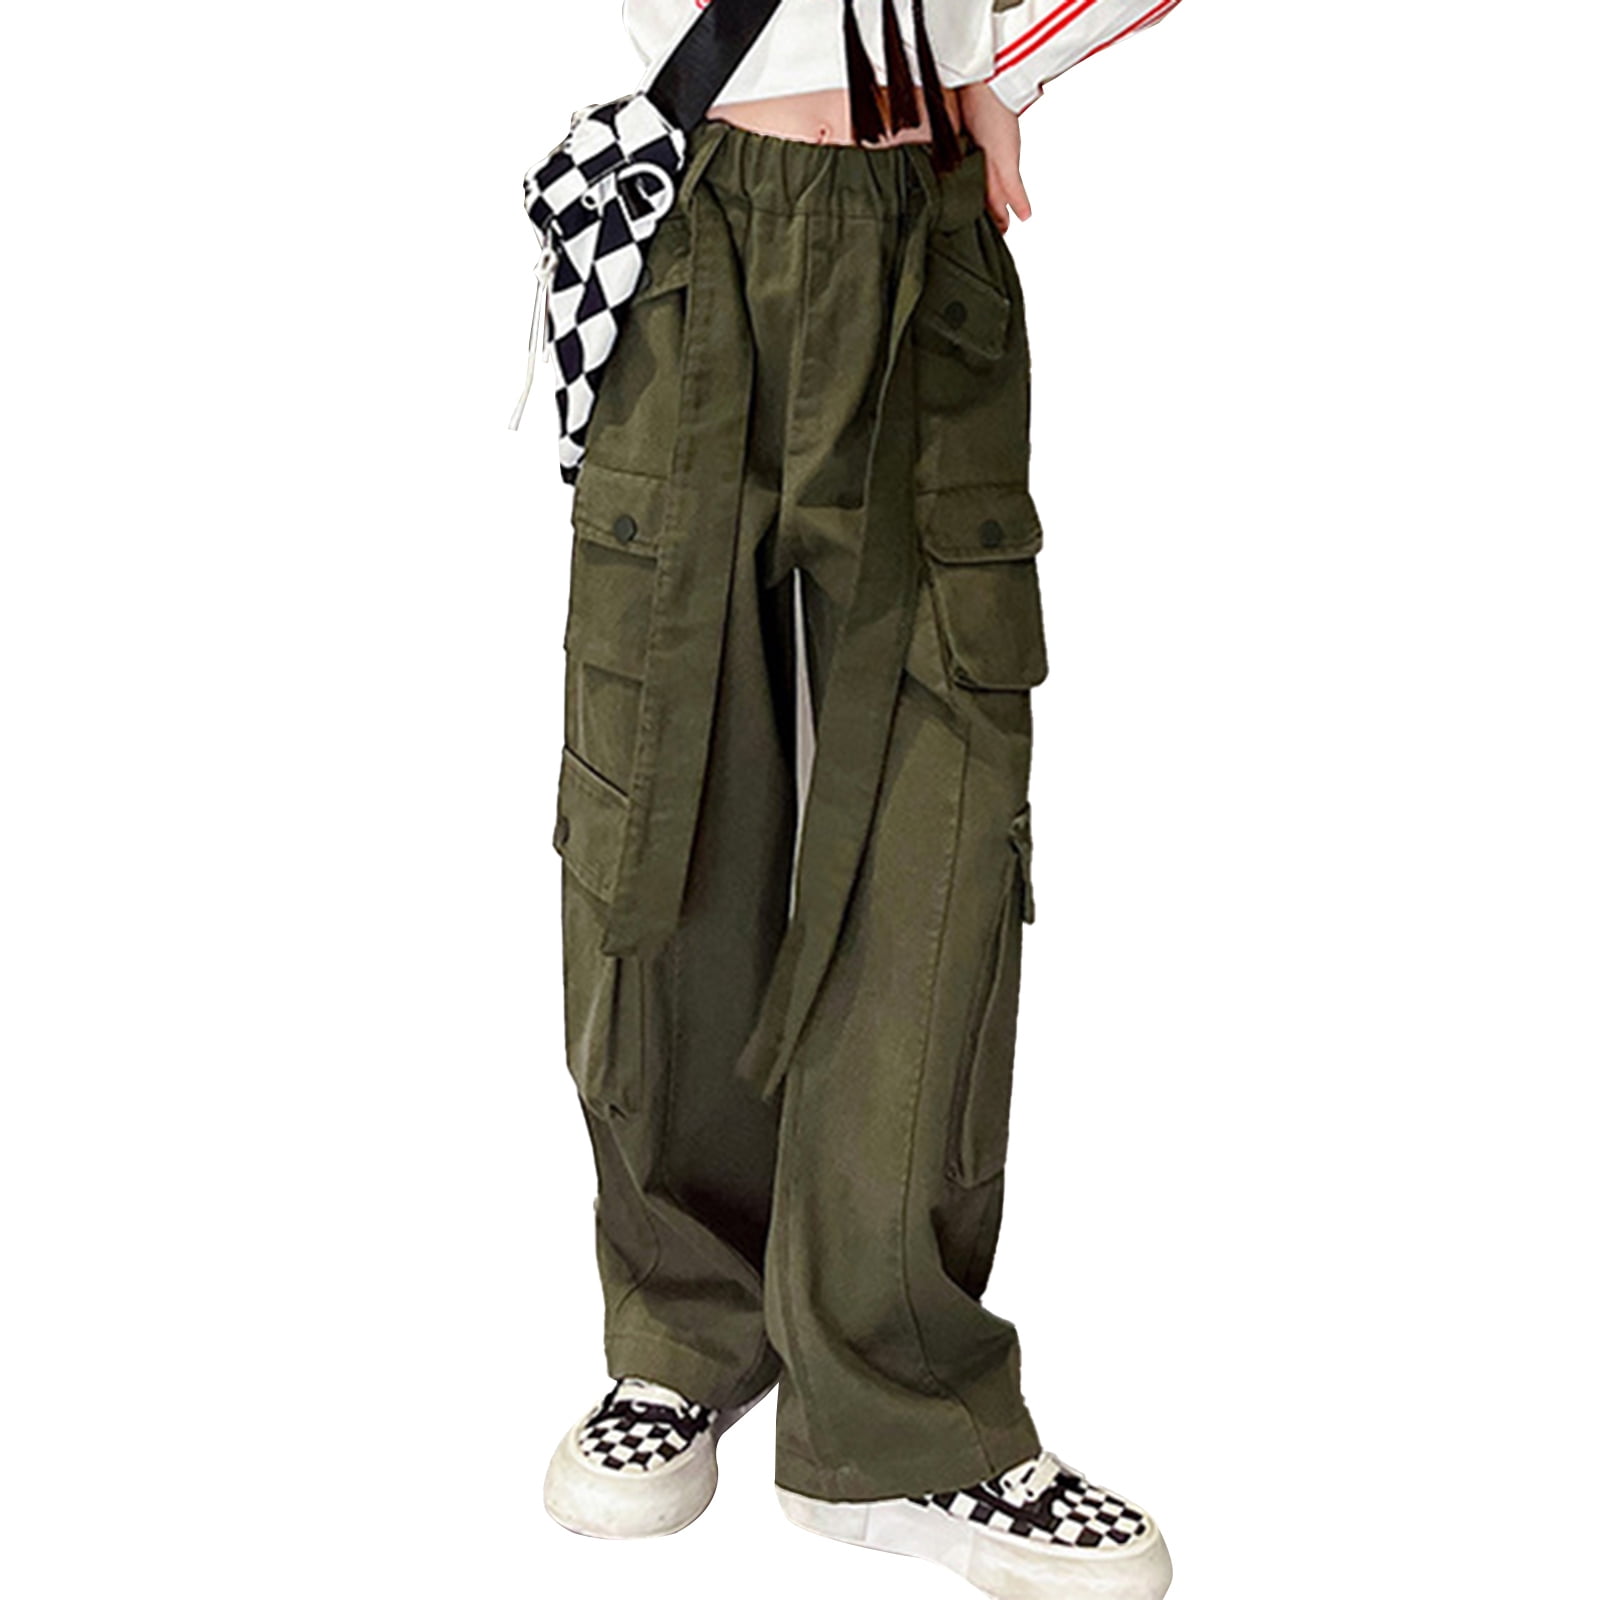 CHICTRY Kids Girls Casual Baggy Pants Drawstring Cargo Pants Dungarees  Green 12